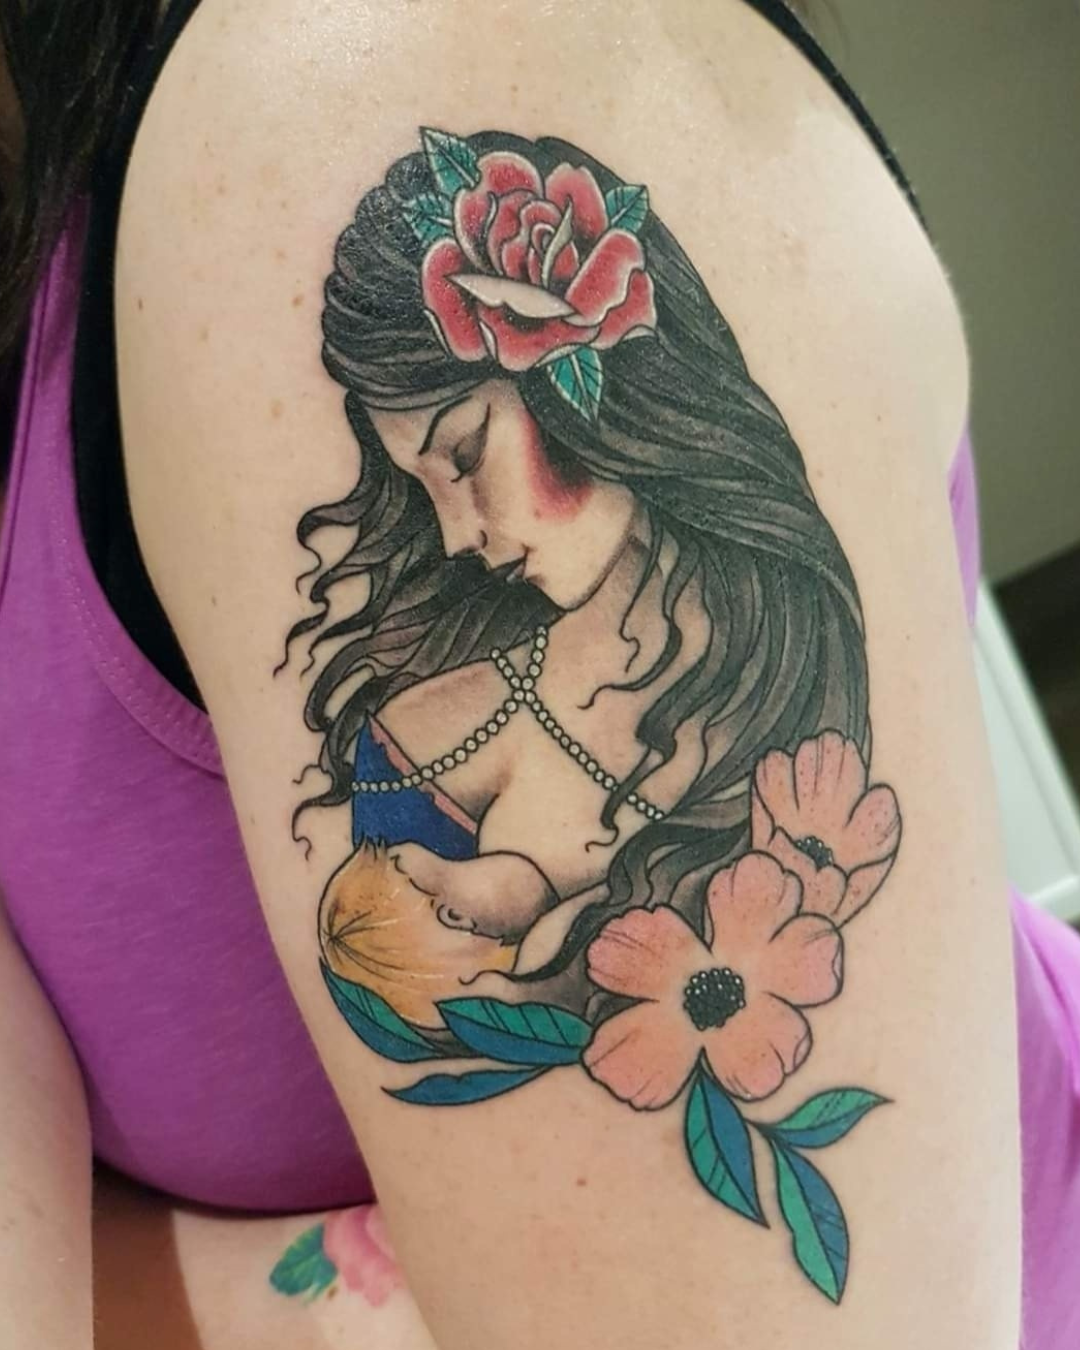 Is It Safe to Get A Tattoo While Breastfeeding?